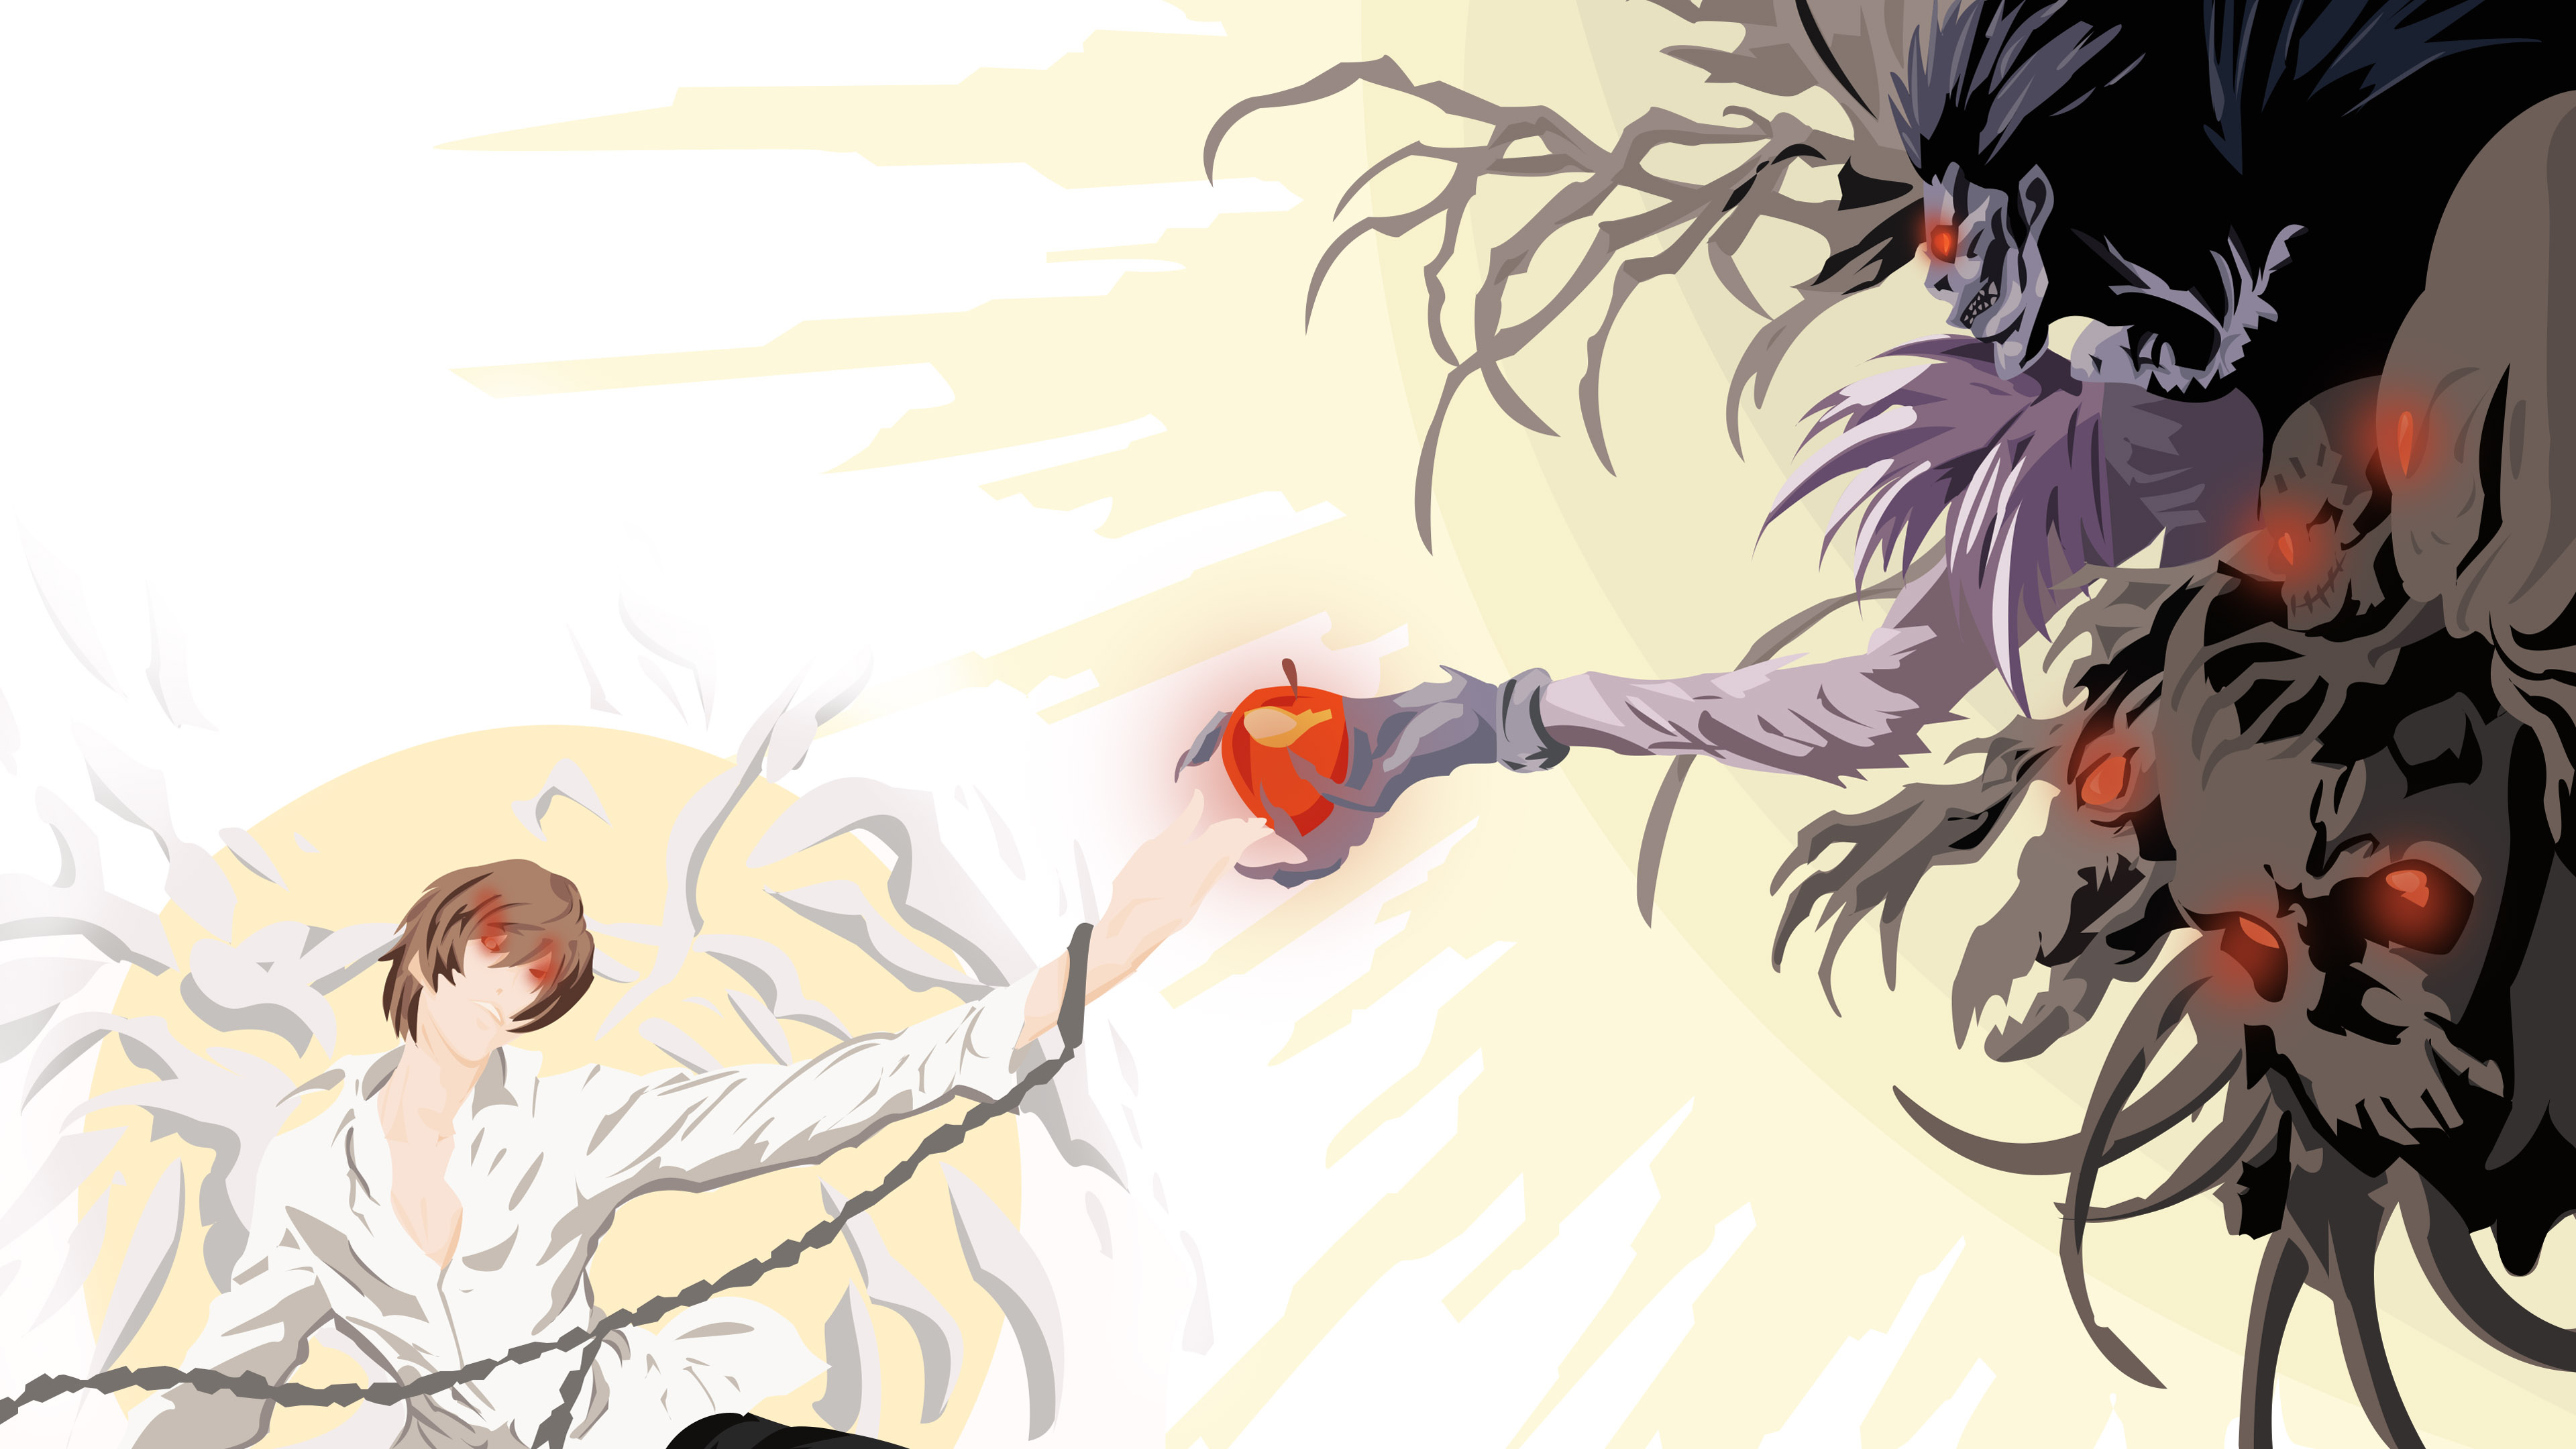 Smiley brown hair glowing eyes kira light yagami with handlock and red eyes ryuk with apple death note k hd